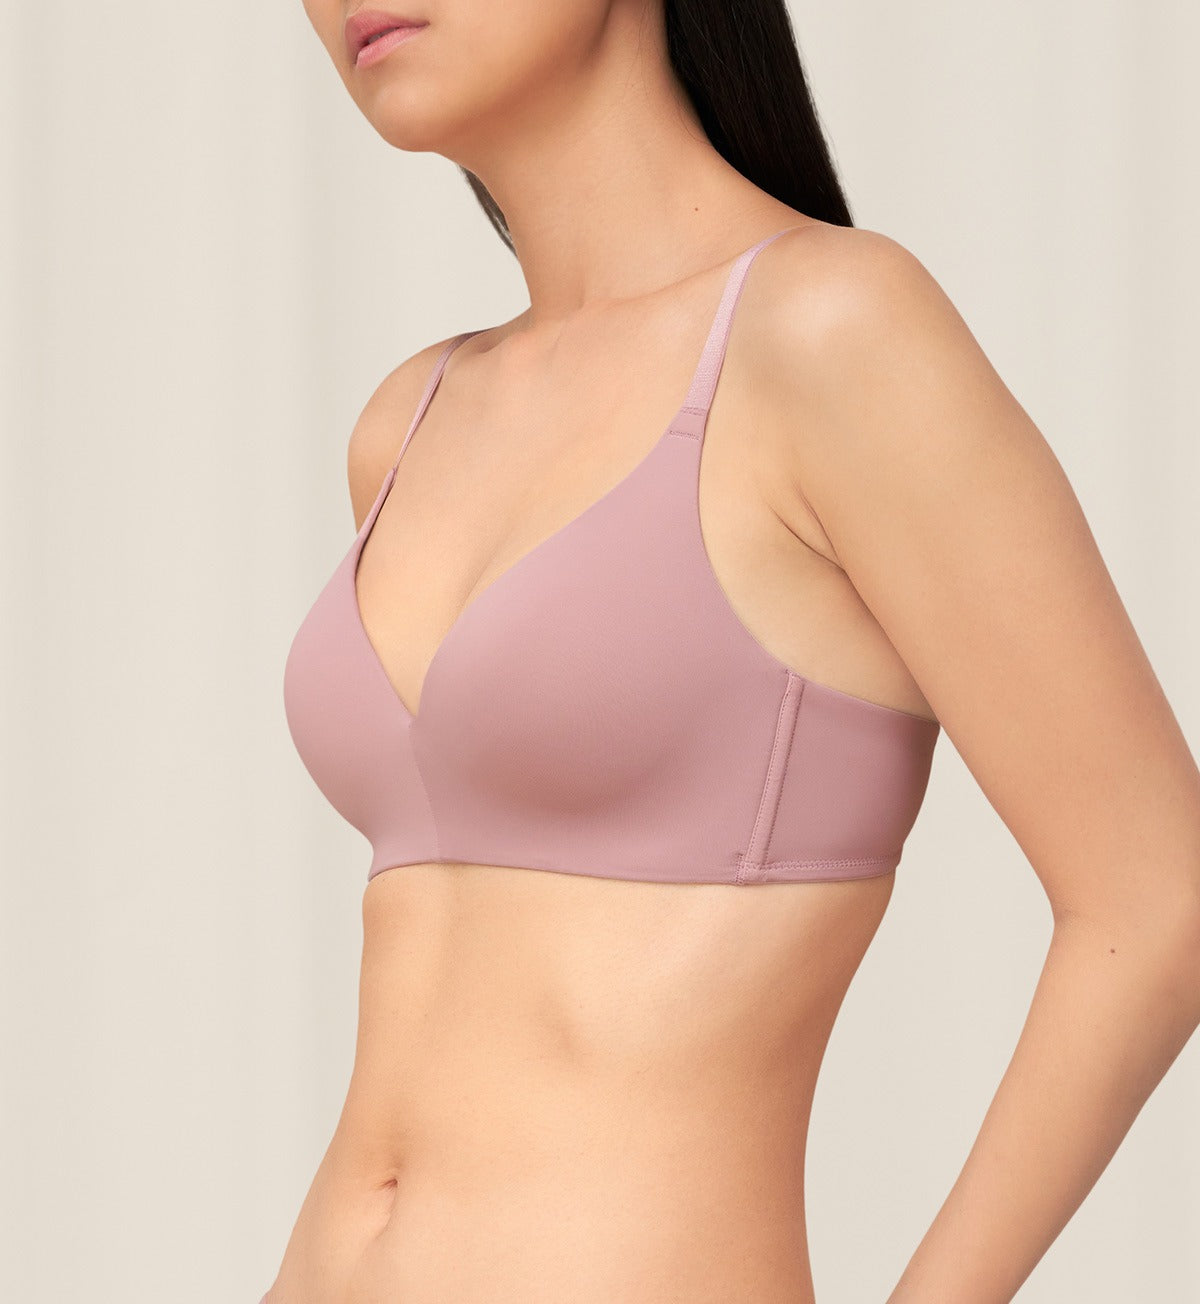 Everydaynatural Latex Non-Wired Padded Bra in Sea Fog